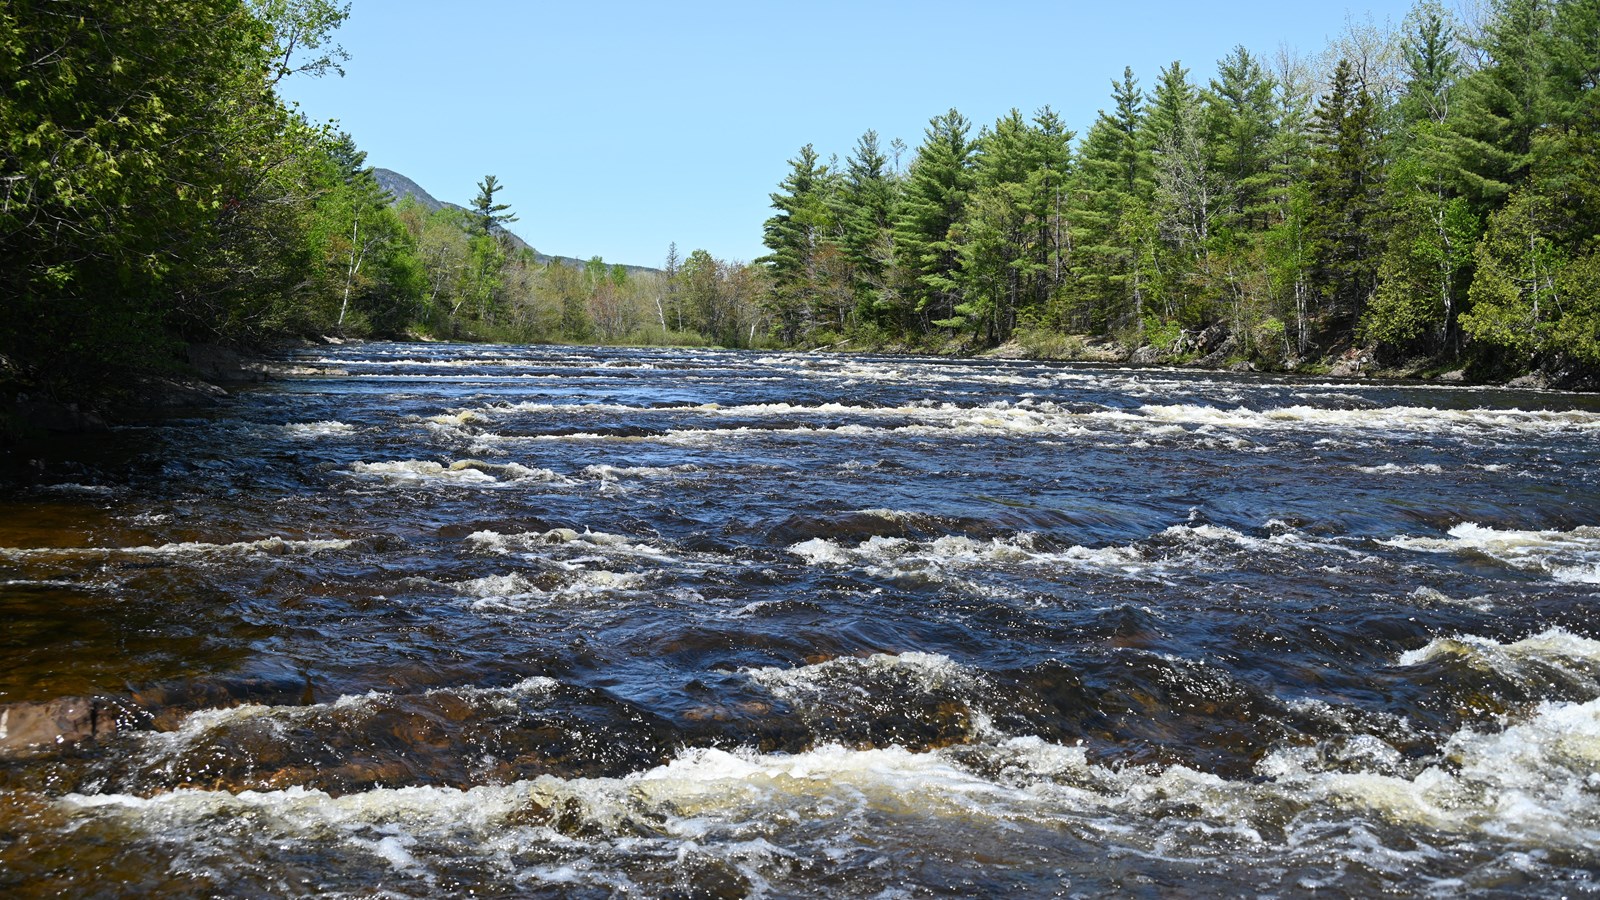 Water flows over rock ledges resembling stairs in the East Branch Penobscot River..